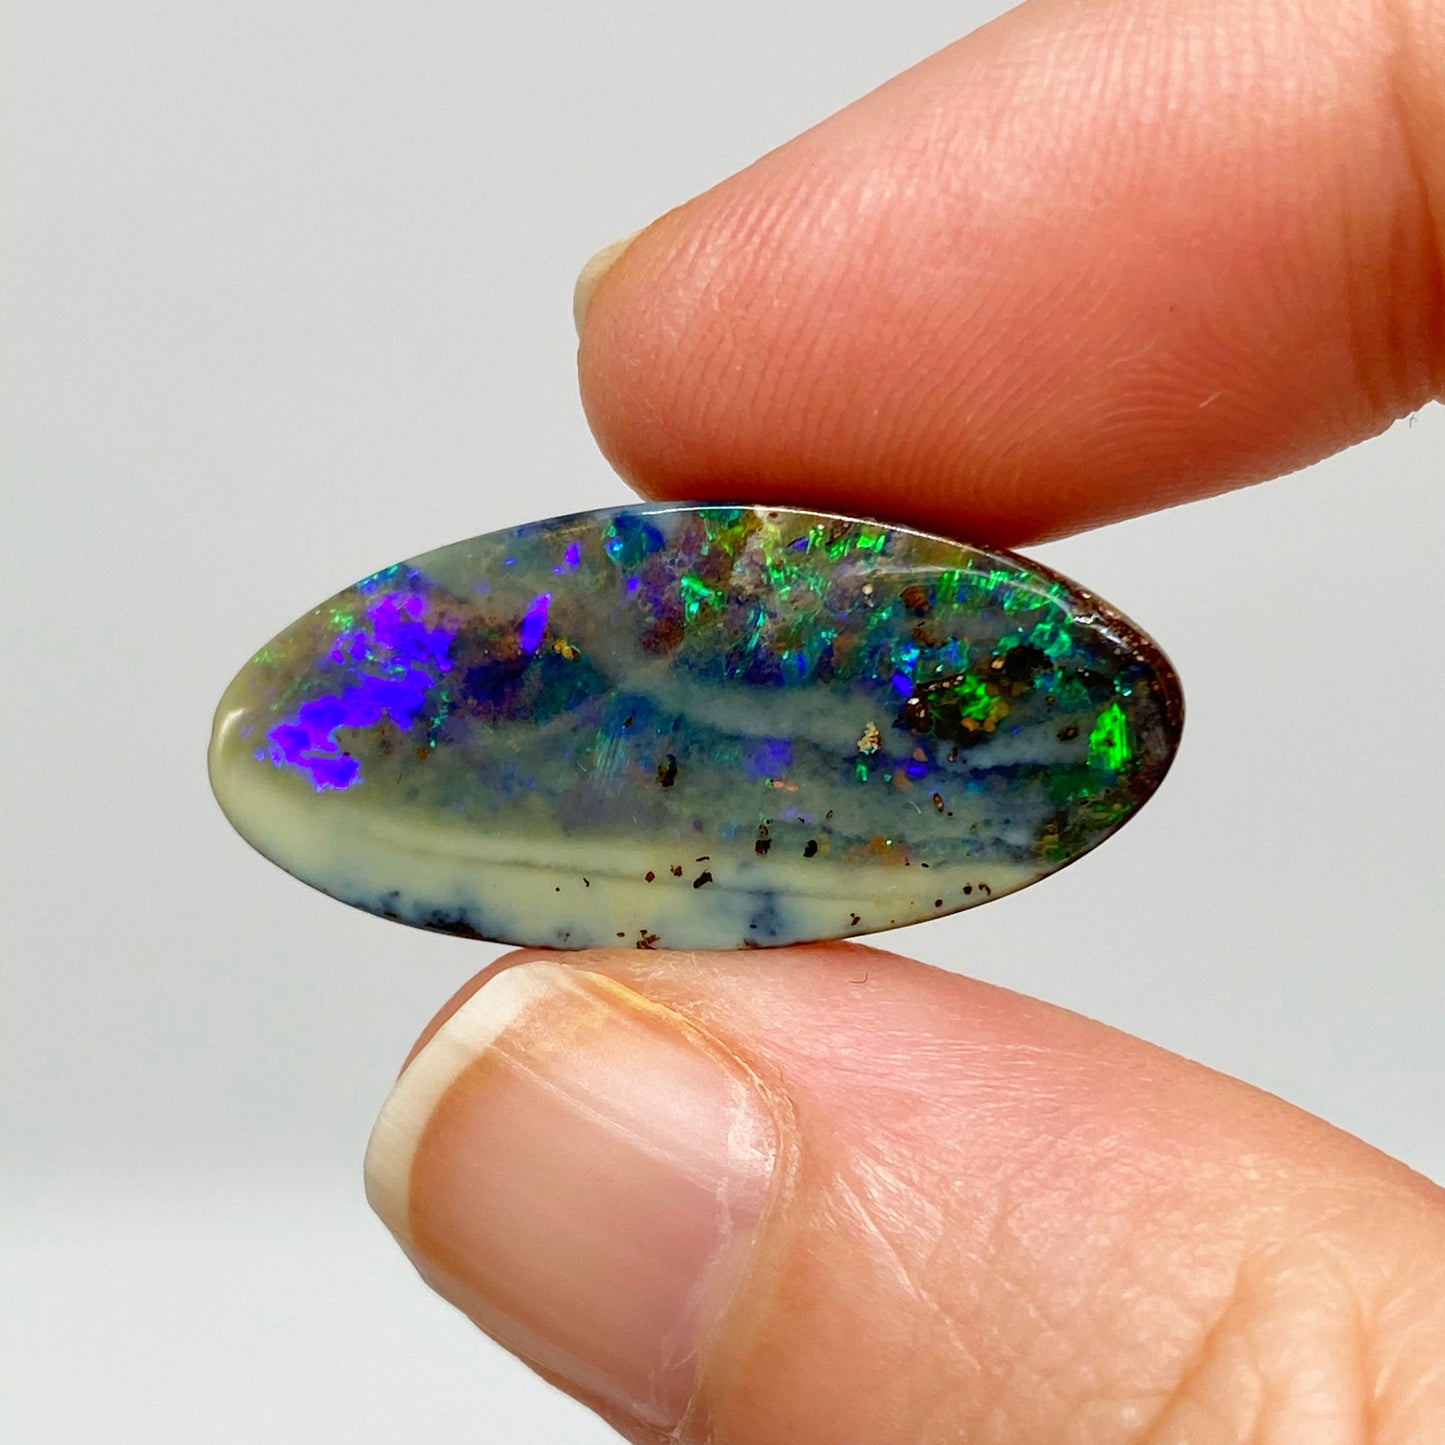 16.03 Ct green and purple boulder opal